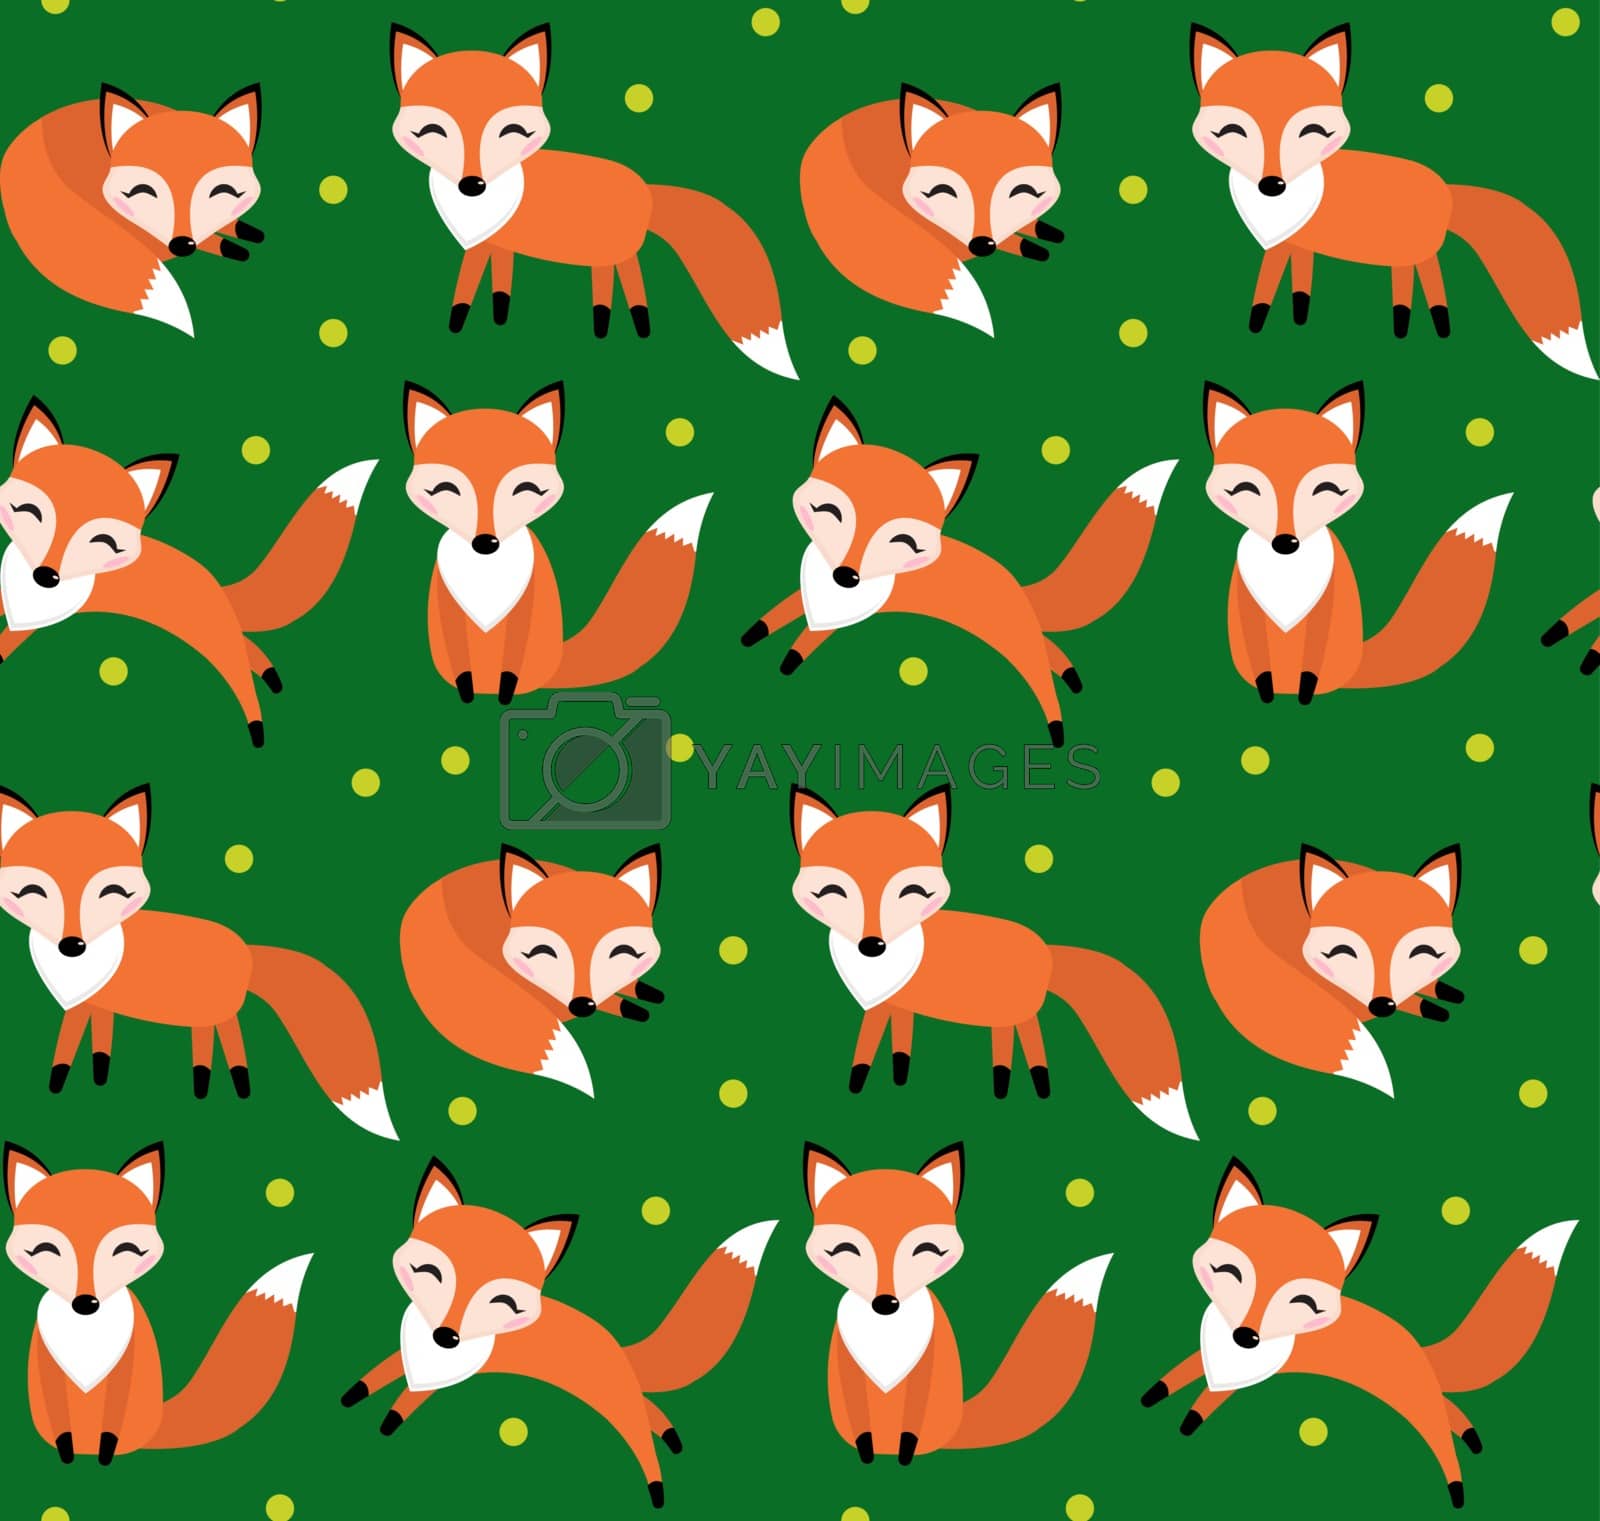 Royalty free image of Cute fox seamless pattern. Foxy endless background, texture. Children s backdrop. Vector illustration. by lucia_fox